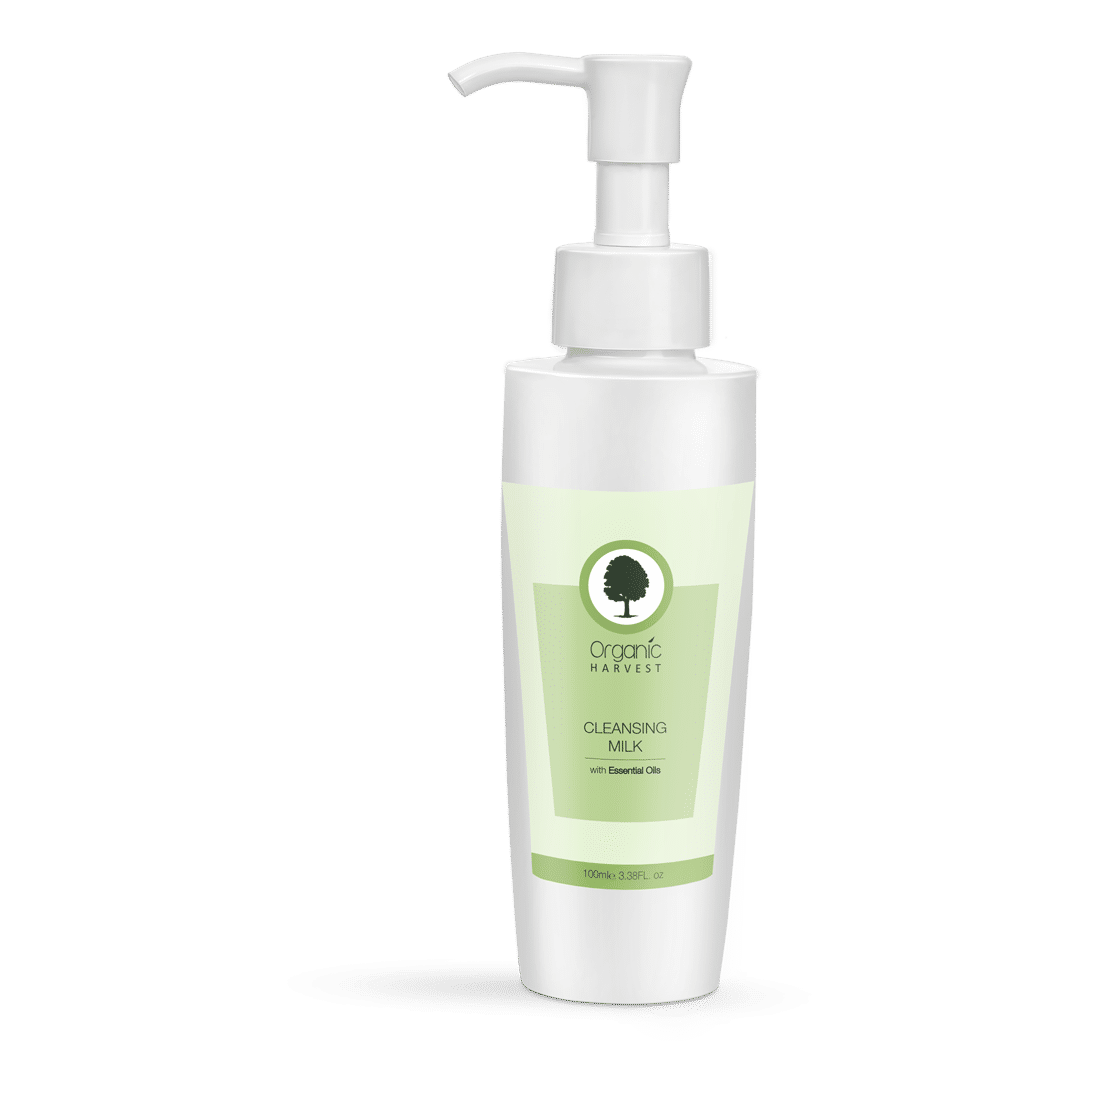 Organic Harvest Cleansing Milk With Essential Oils